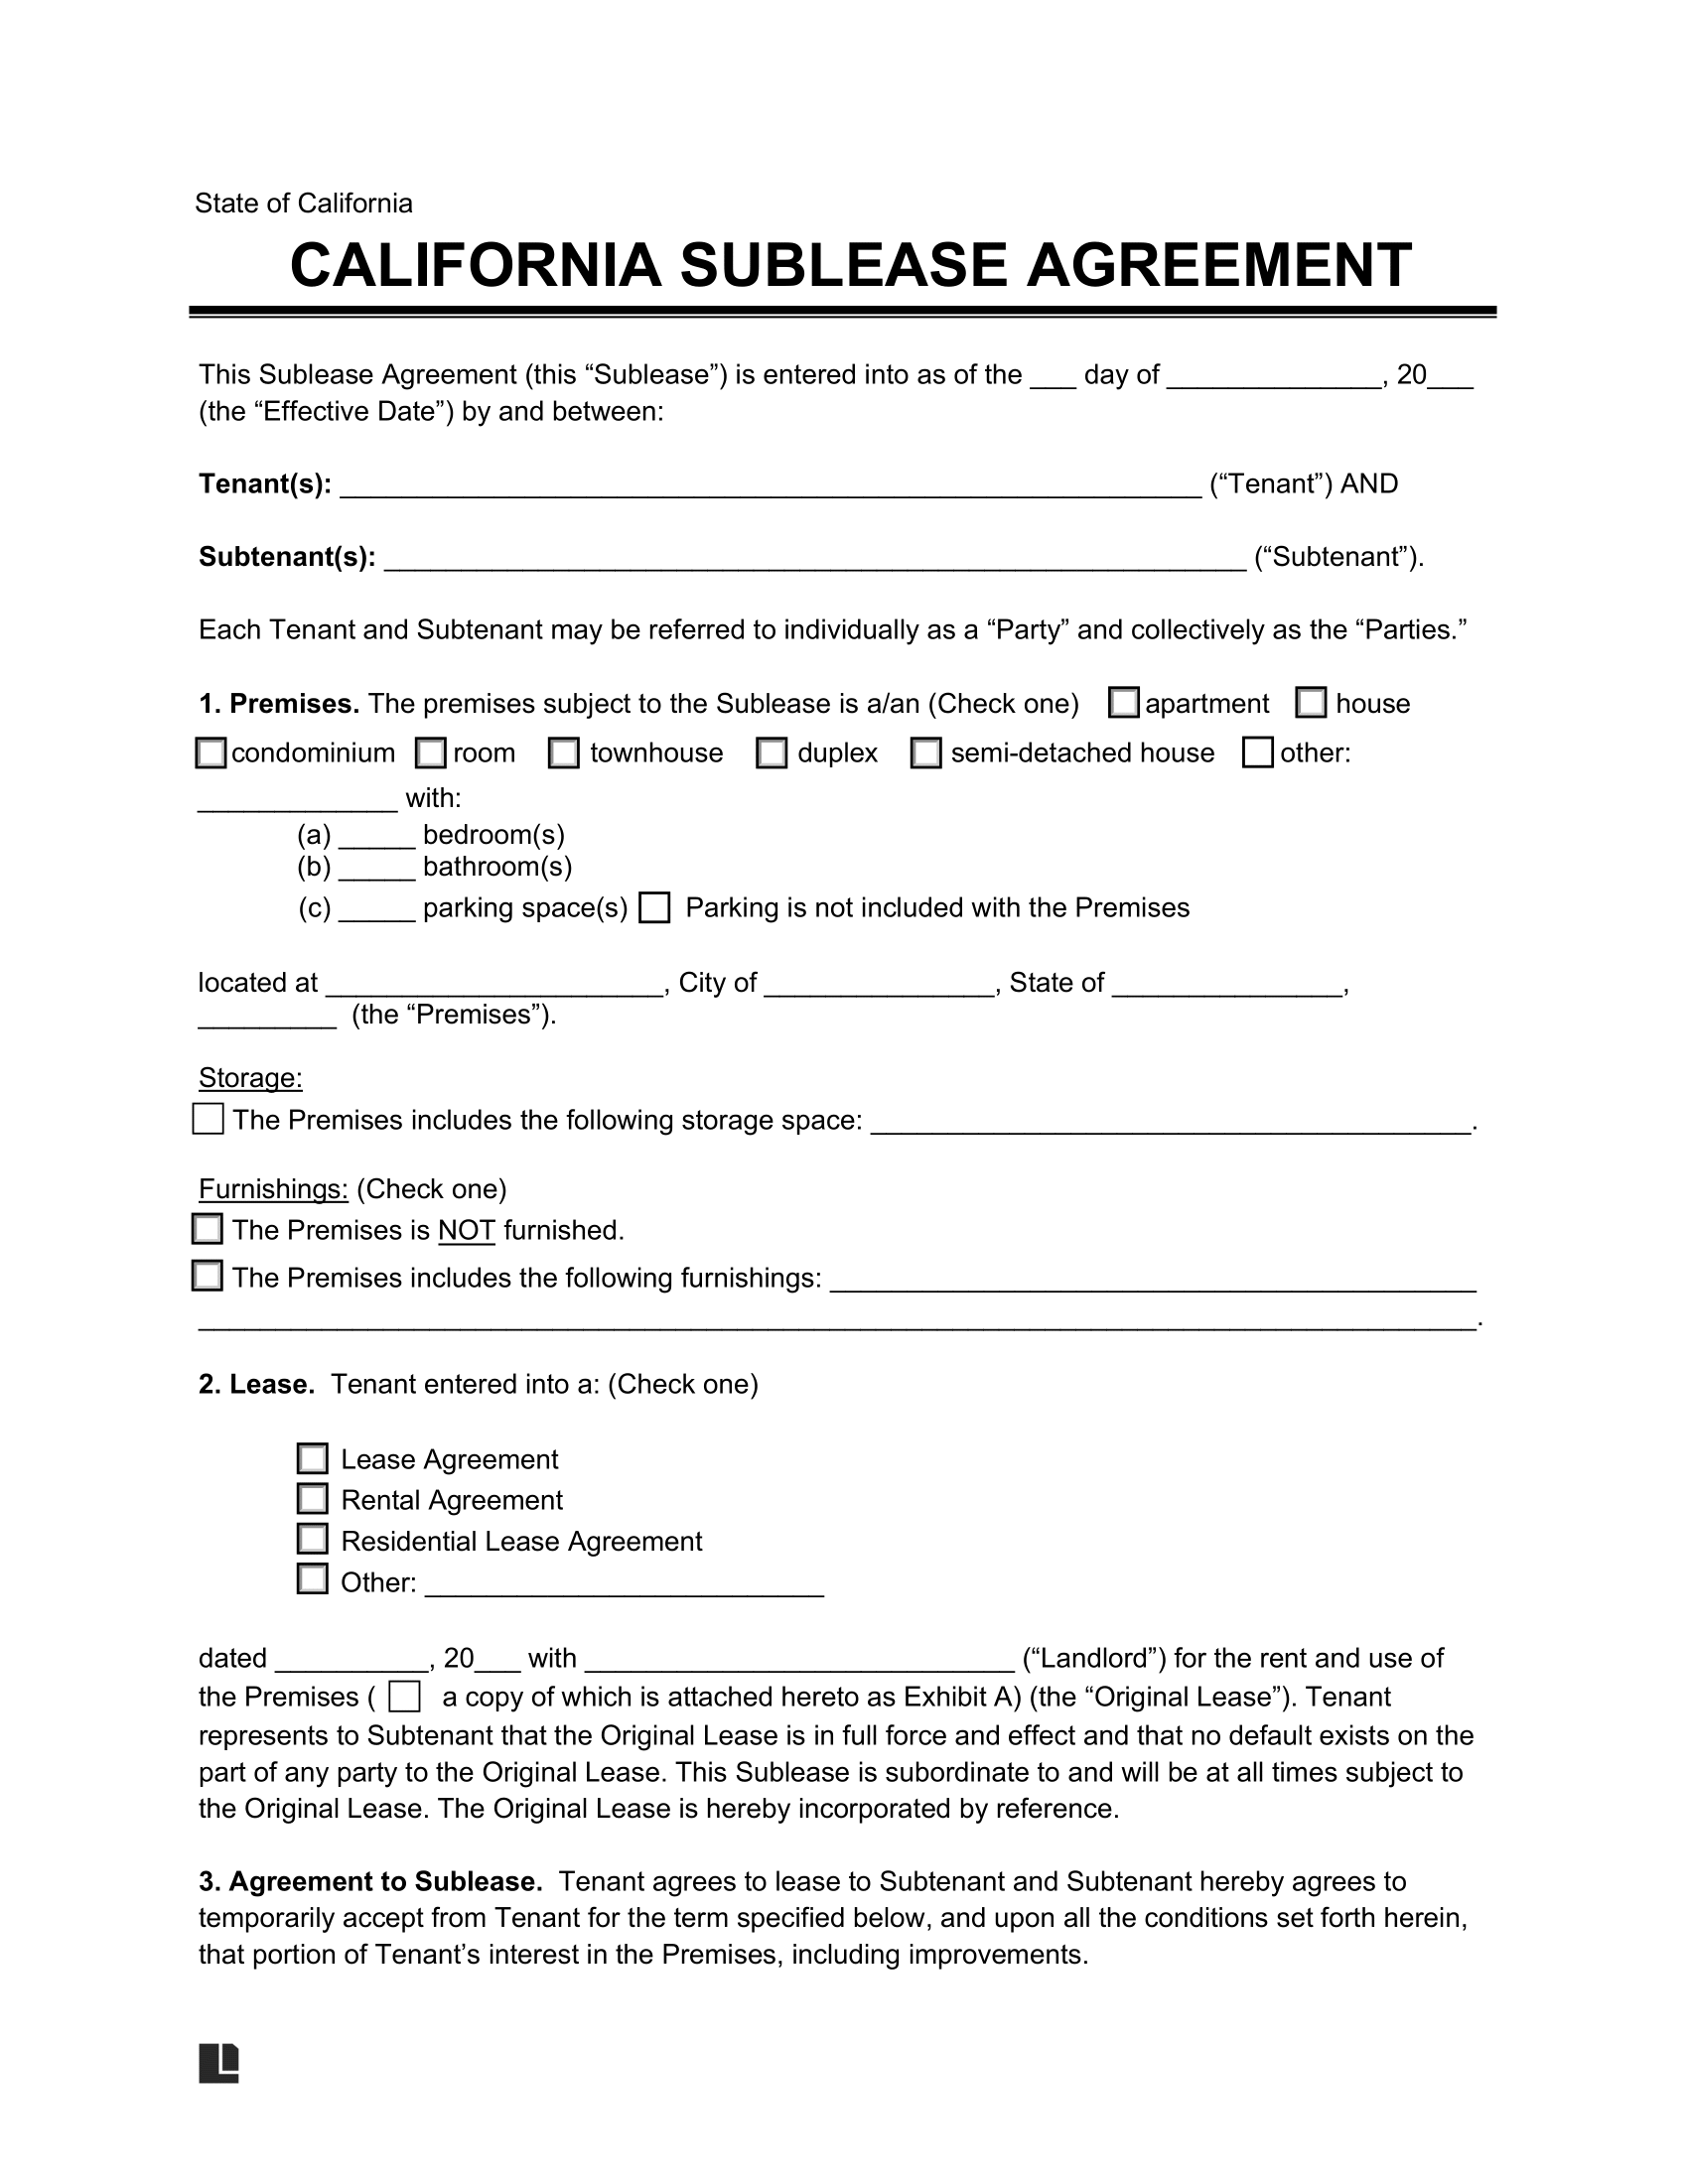 California Sublease Agreement Template